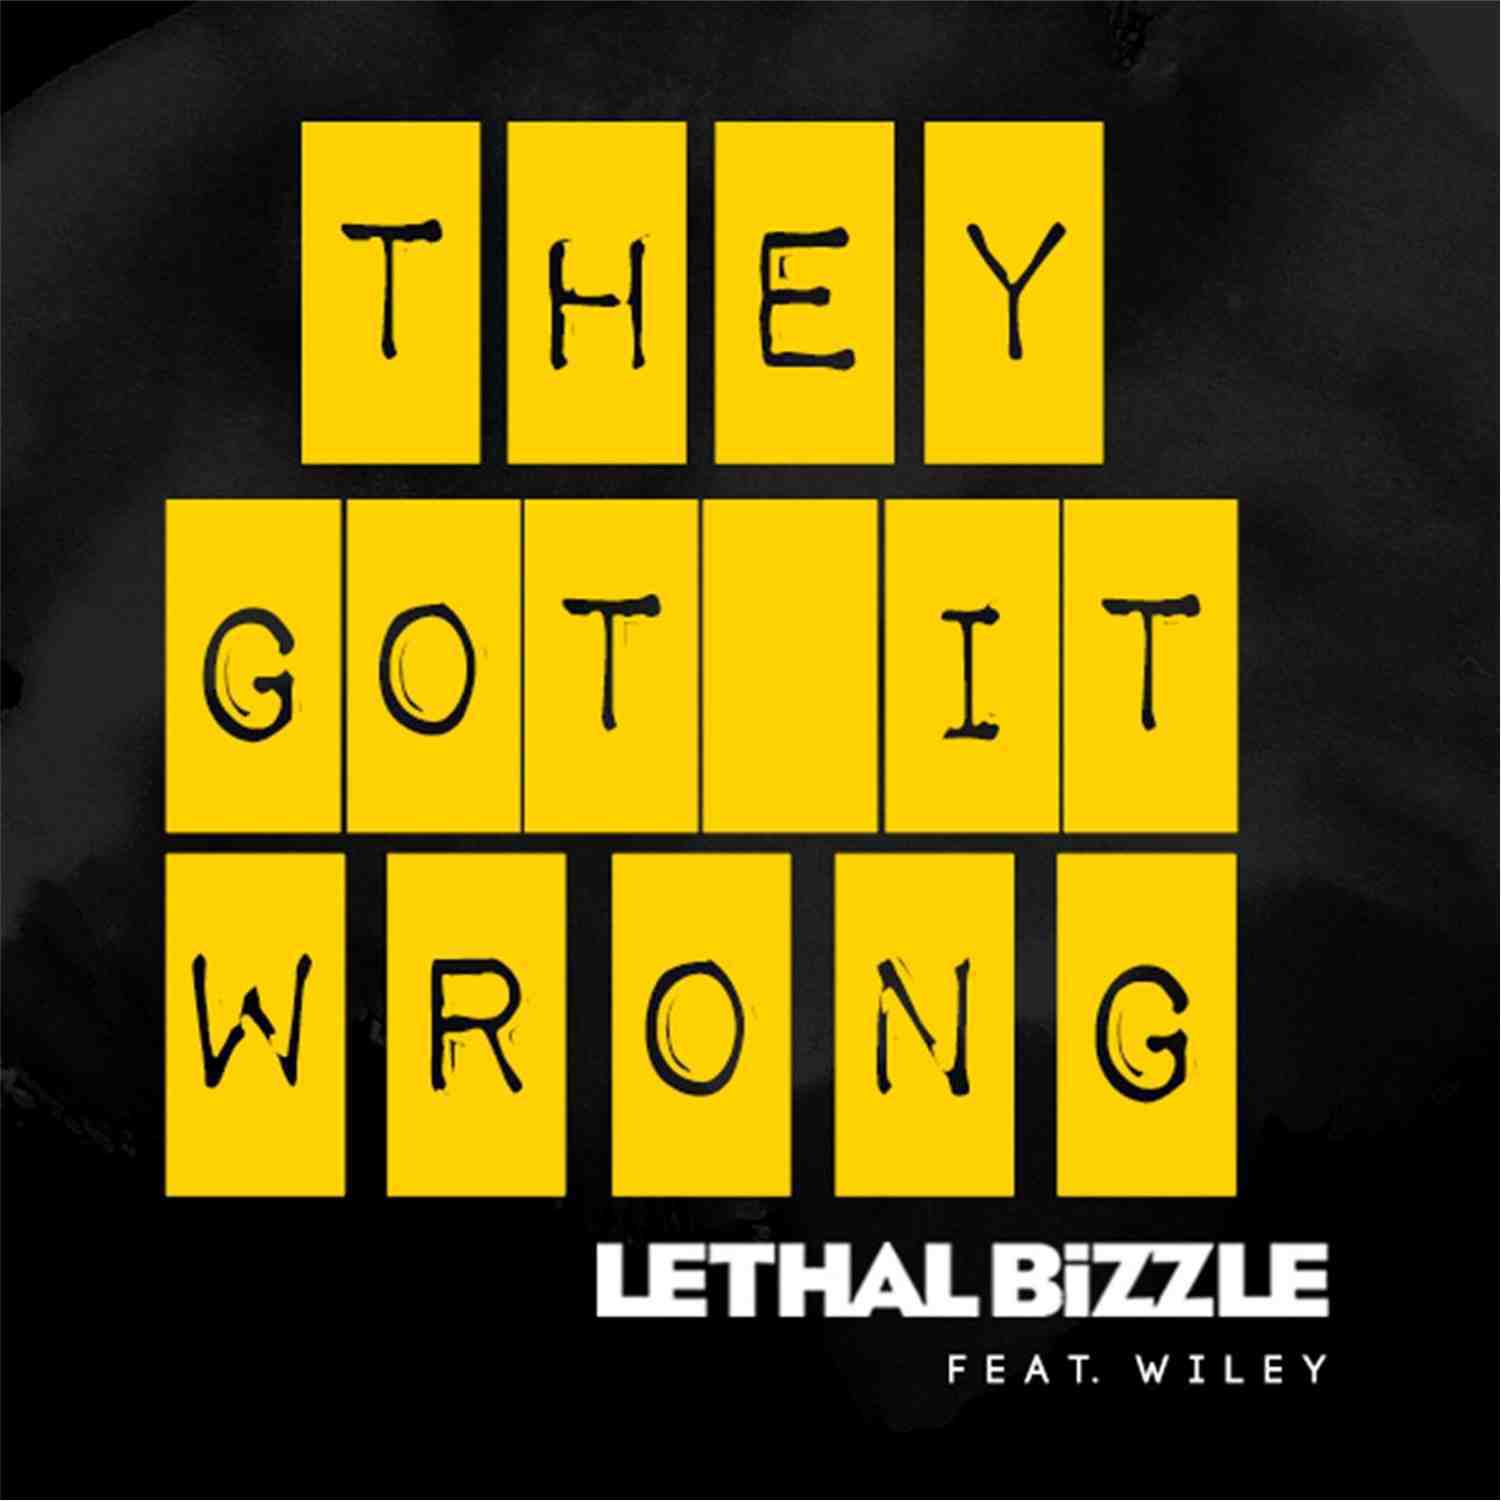 Lethal Bizzle - They Got It Wrong (feat. Wiley) [Radio Edit]